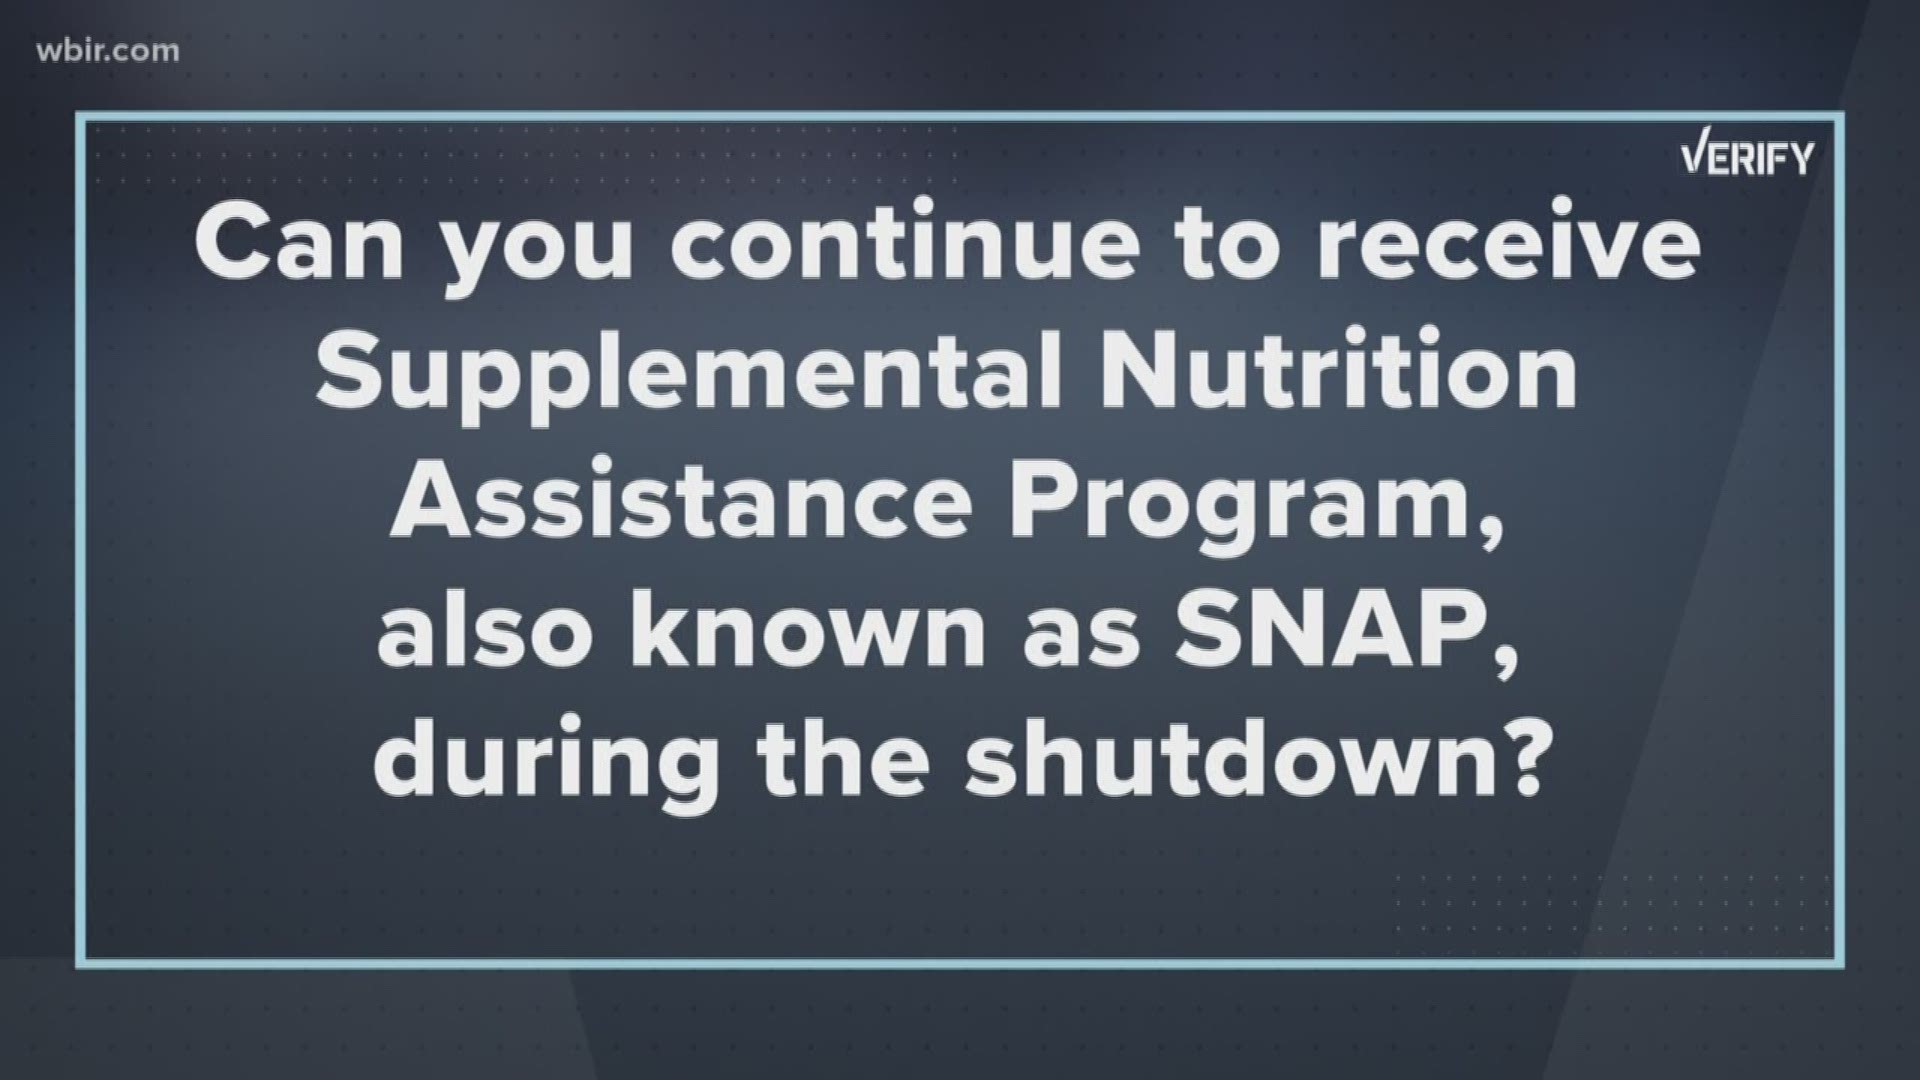 As the government shutdown nears record-breaking length, lots of questions and claims are circulating online.